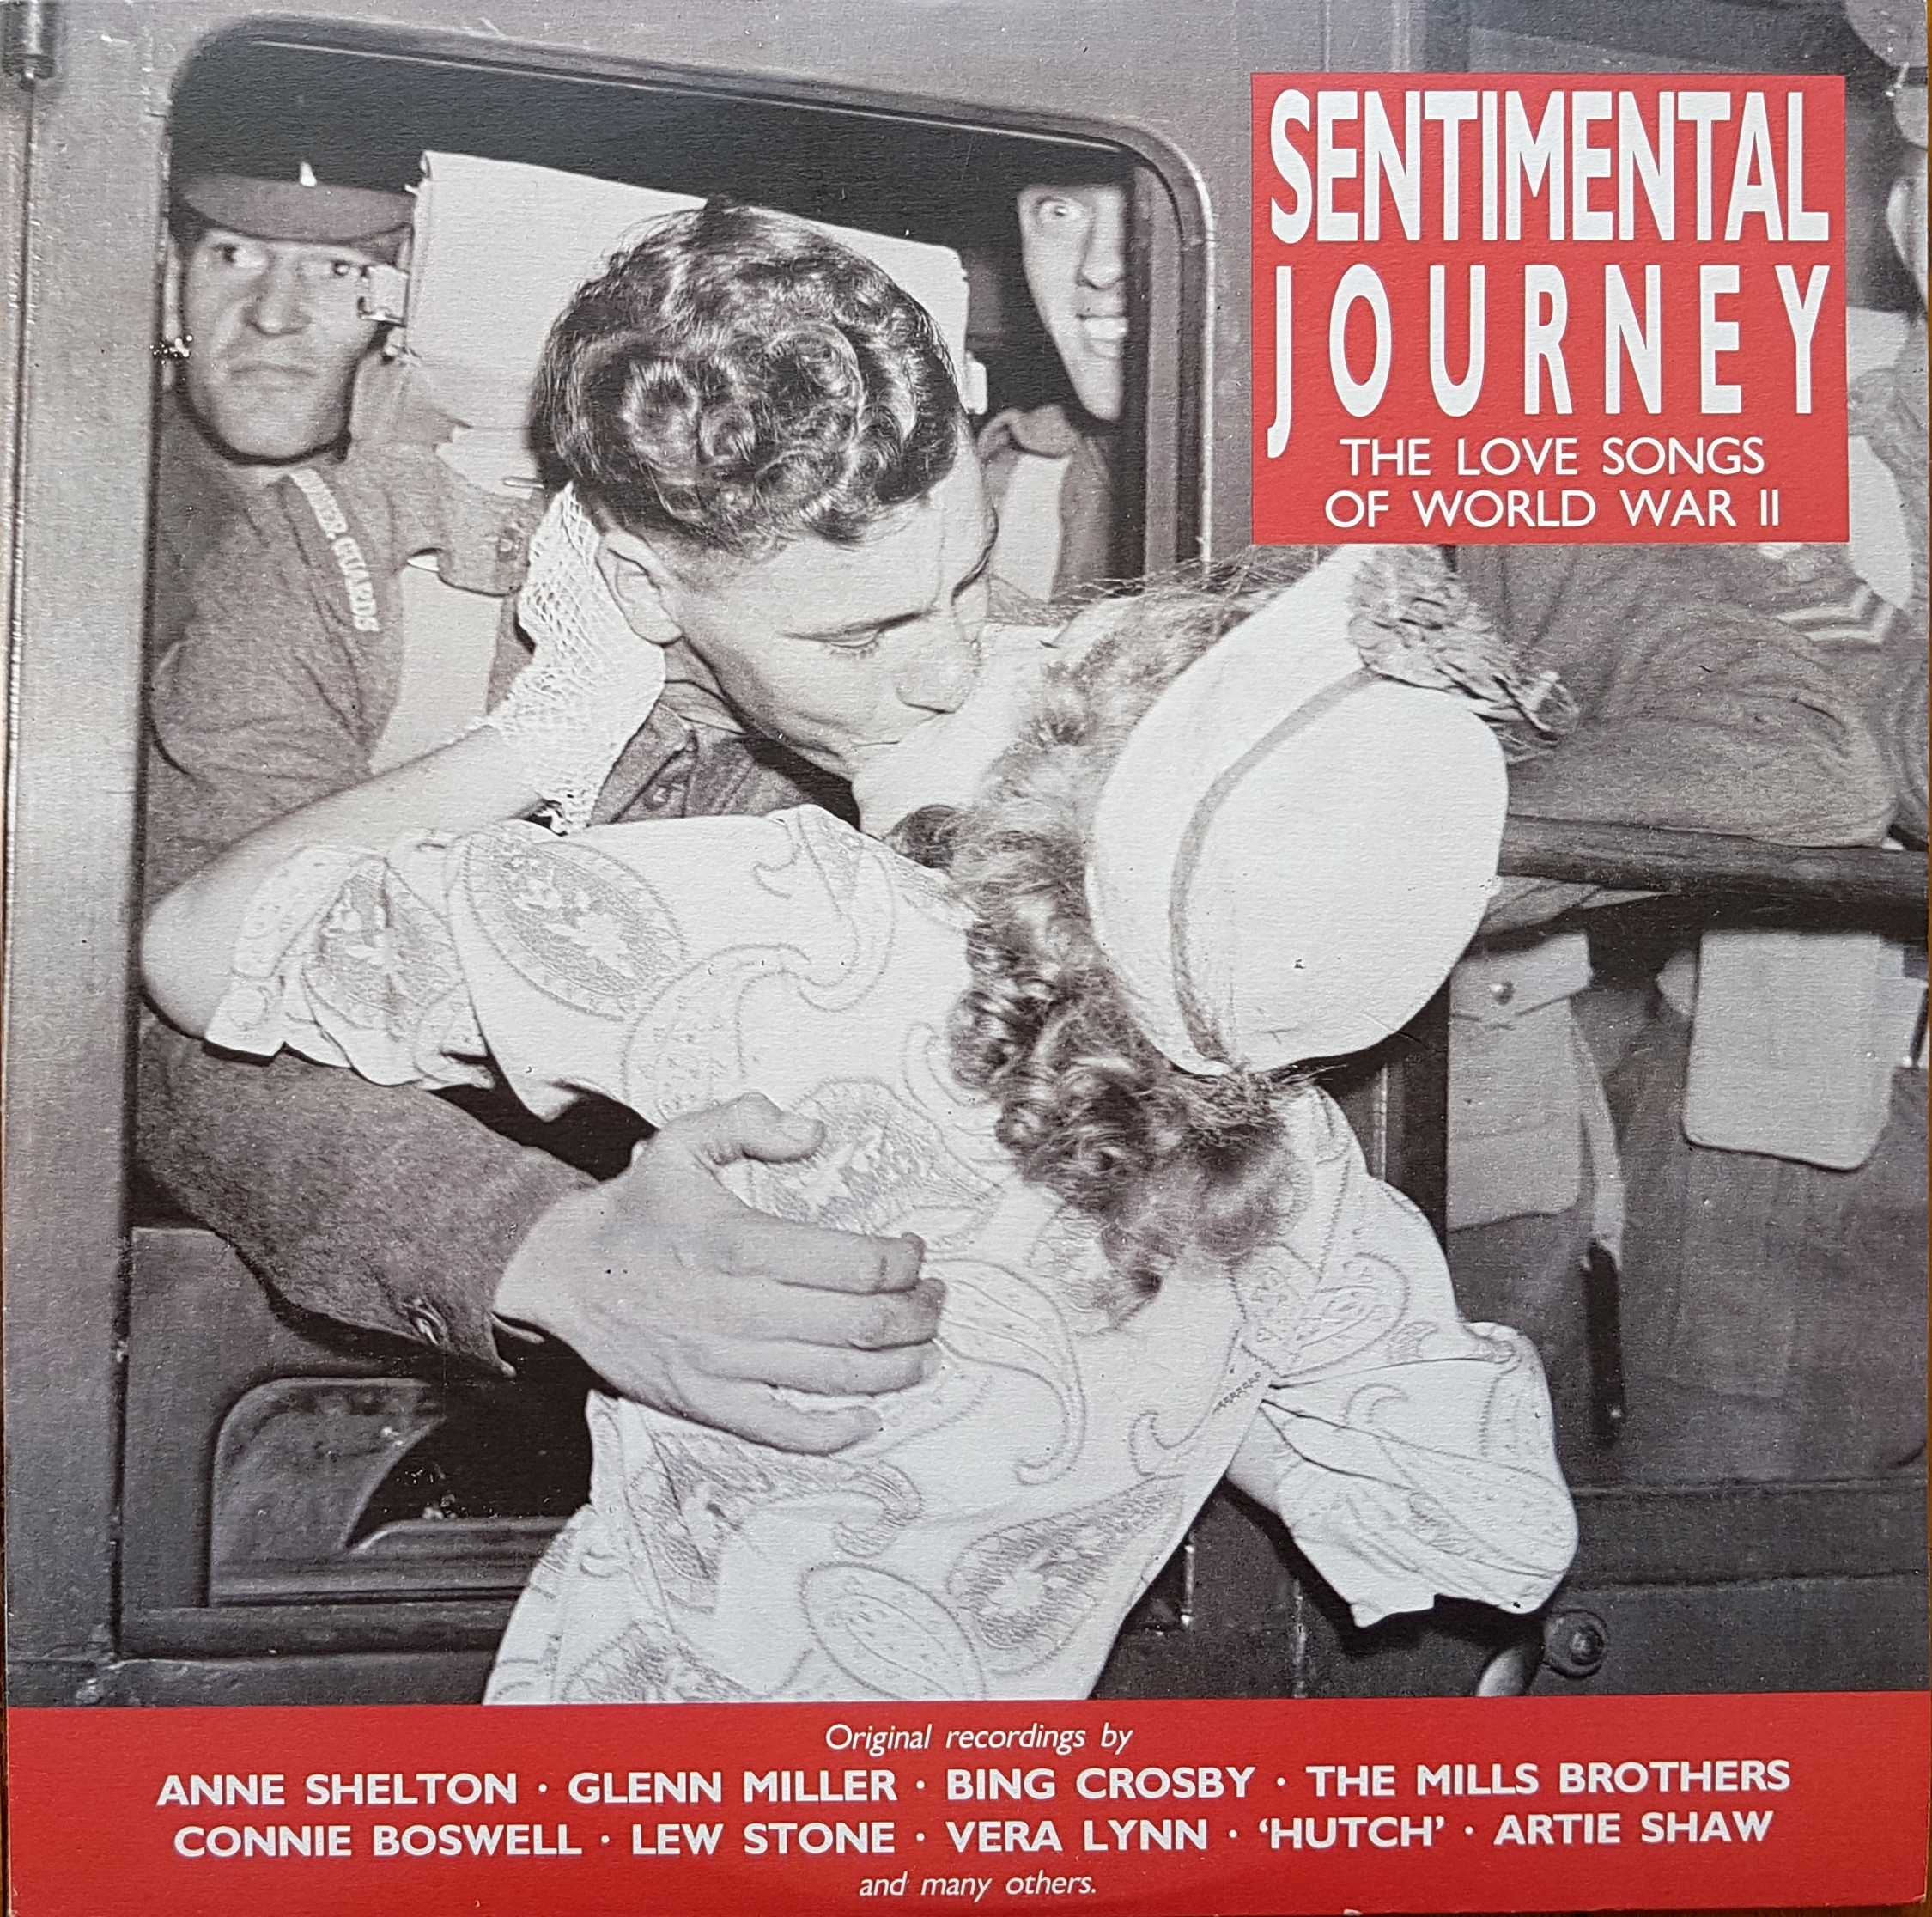 Picture of REQ 751 Sentimental journey by artist Various from the BBC albums - Records and Tapes library